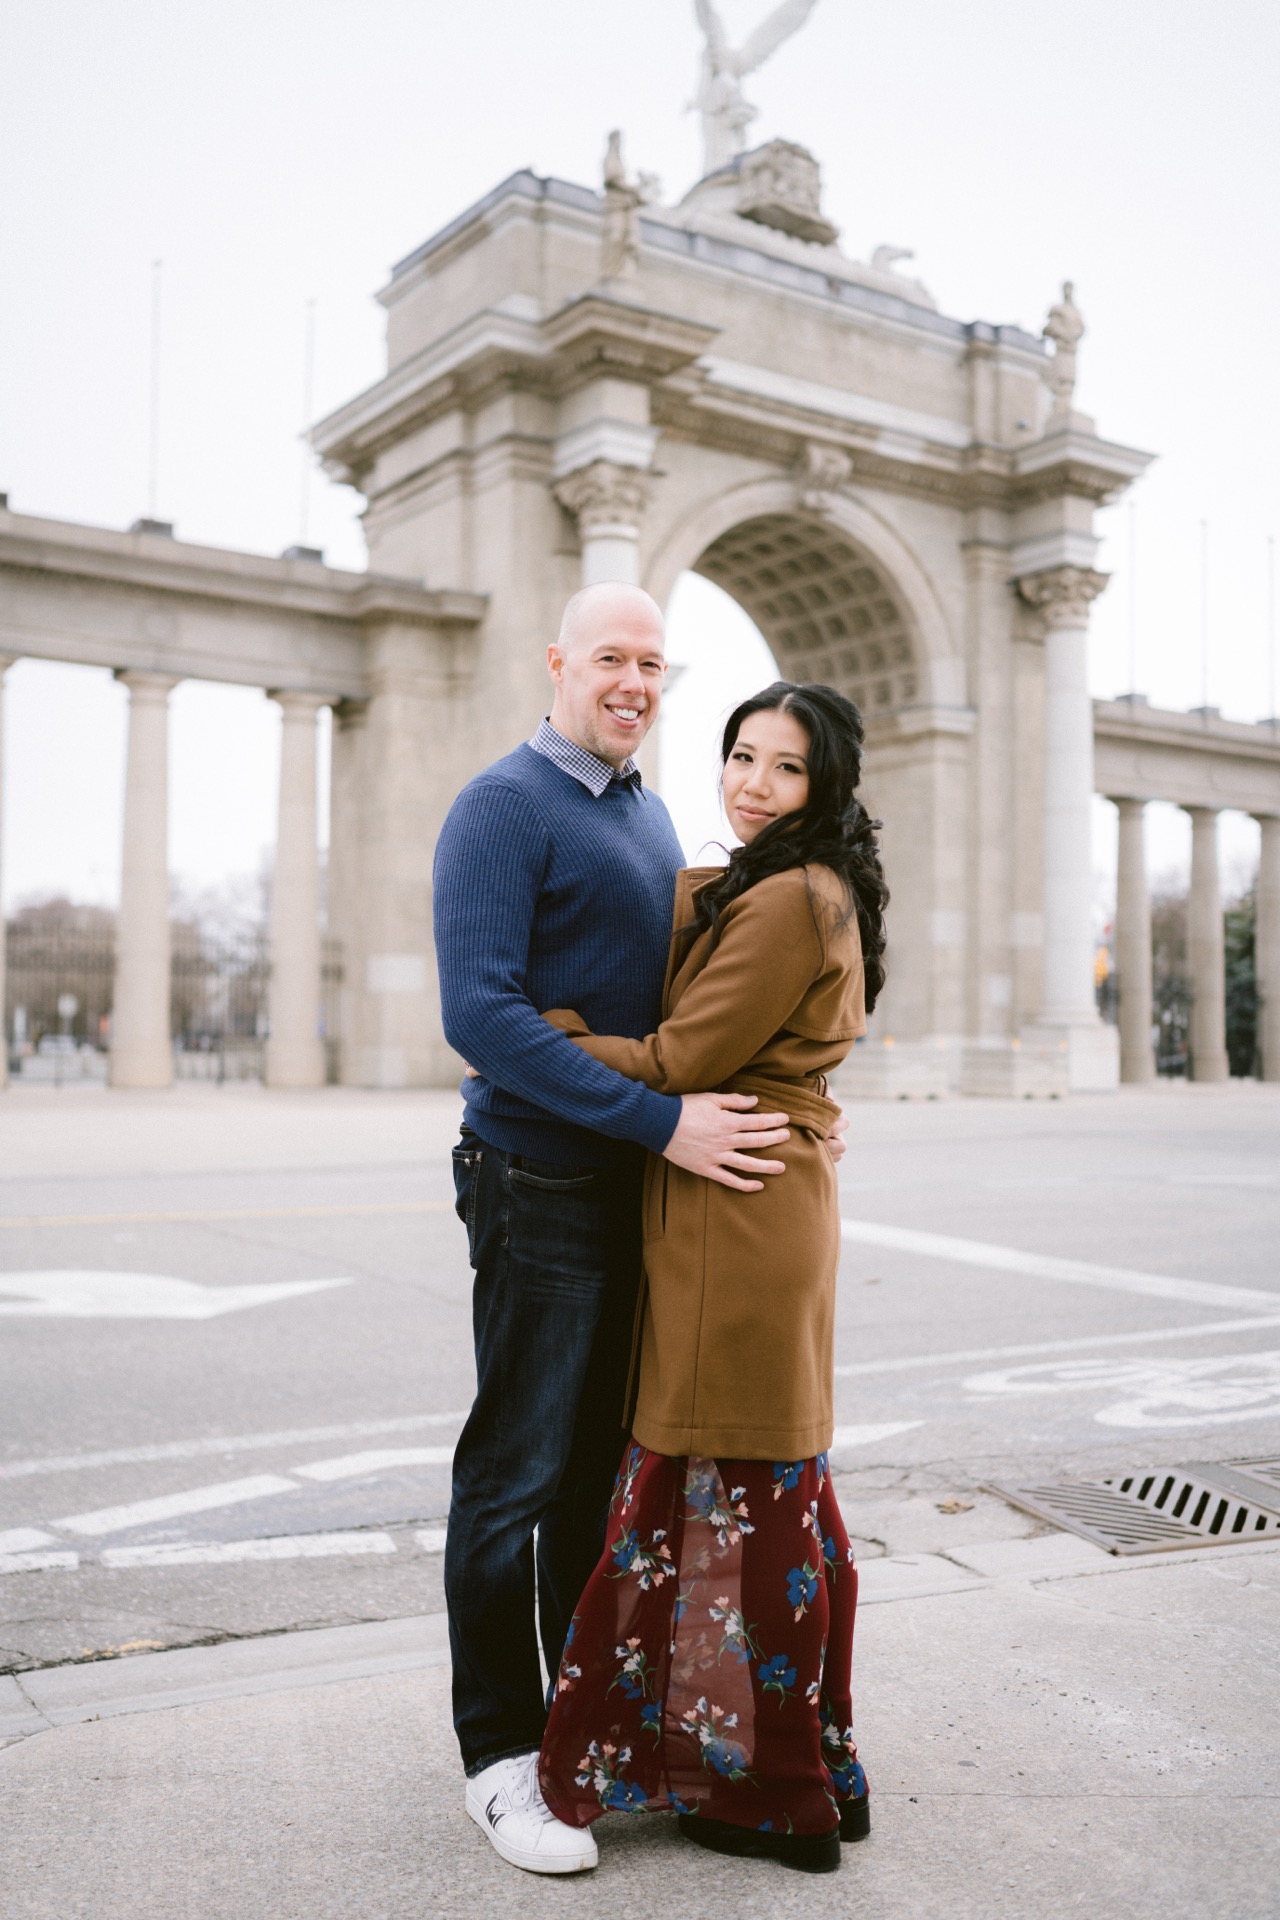 Couple embracing during their engagement session in front of an archway monument at Exhibition Place